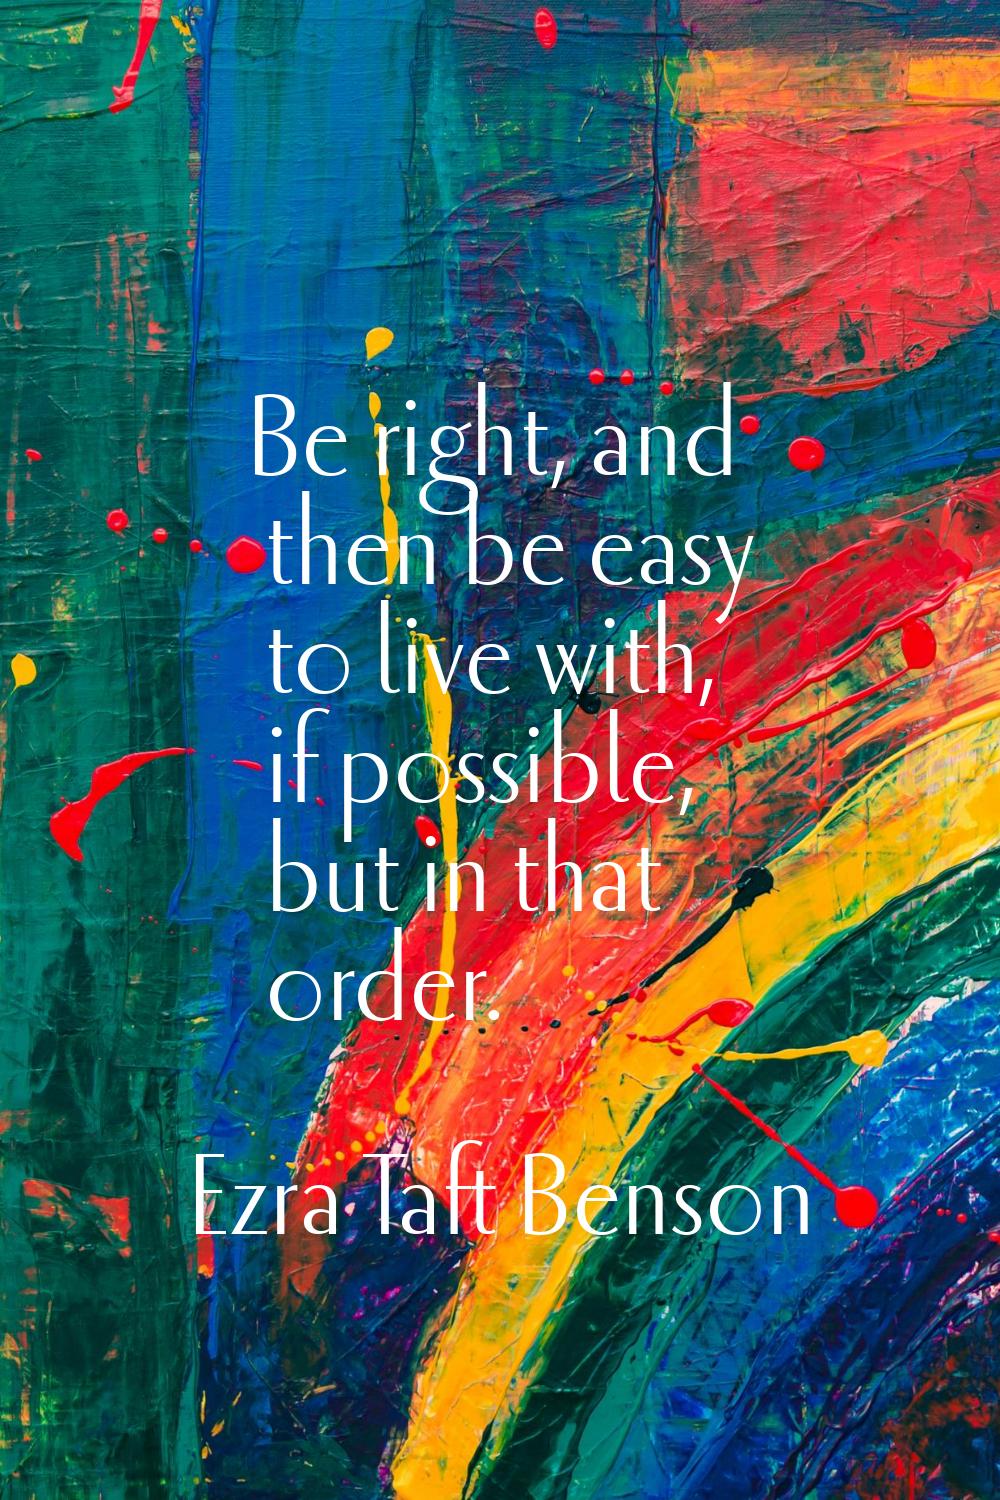 Be right, and then be easy to live with, if possible, but in that order.